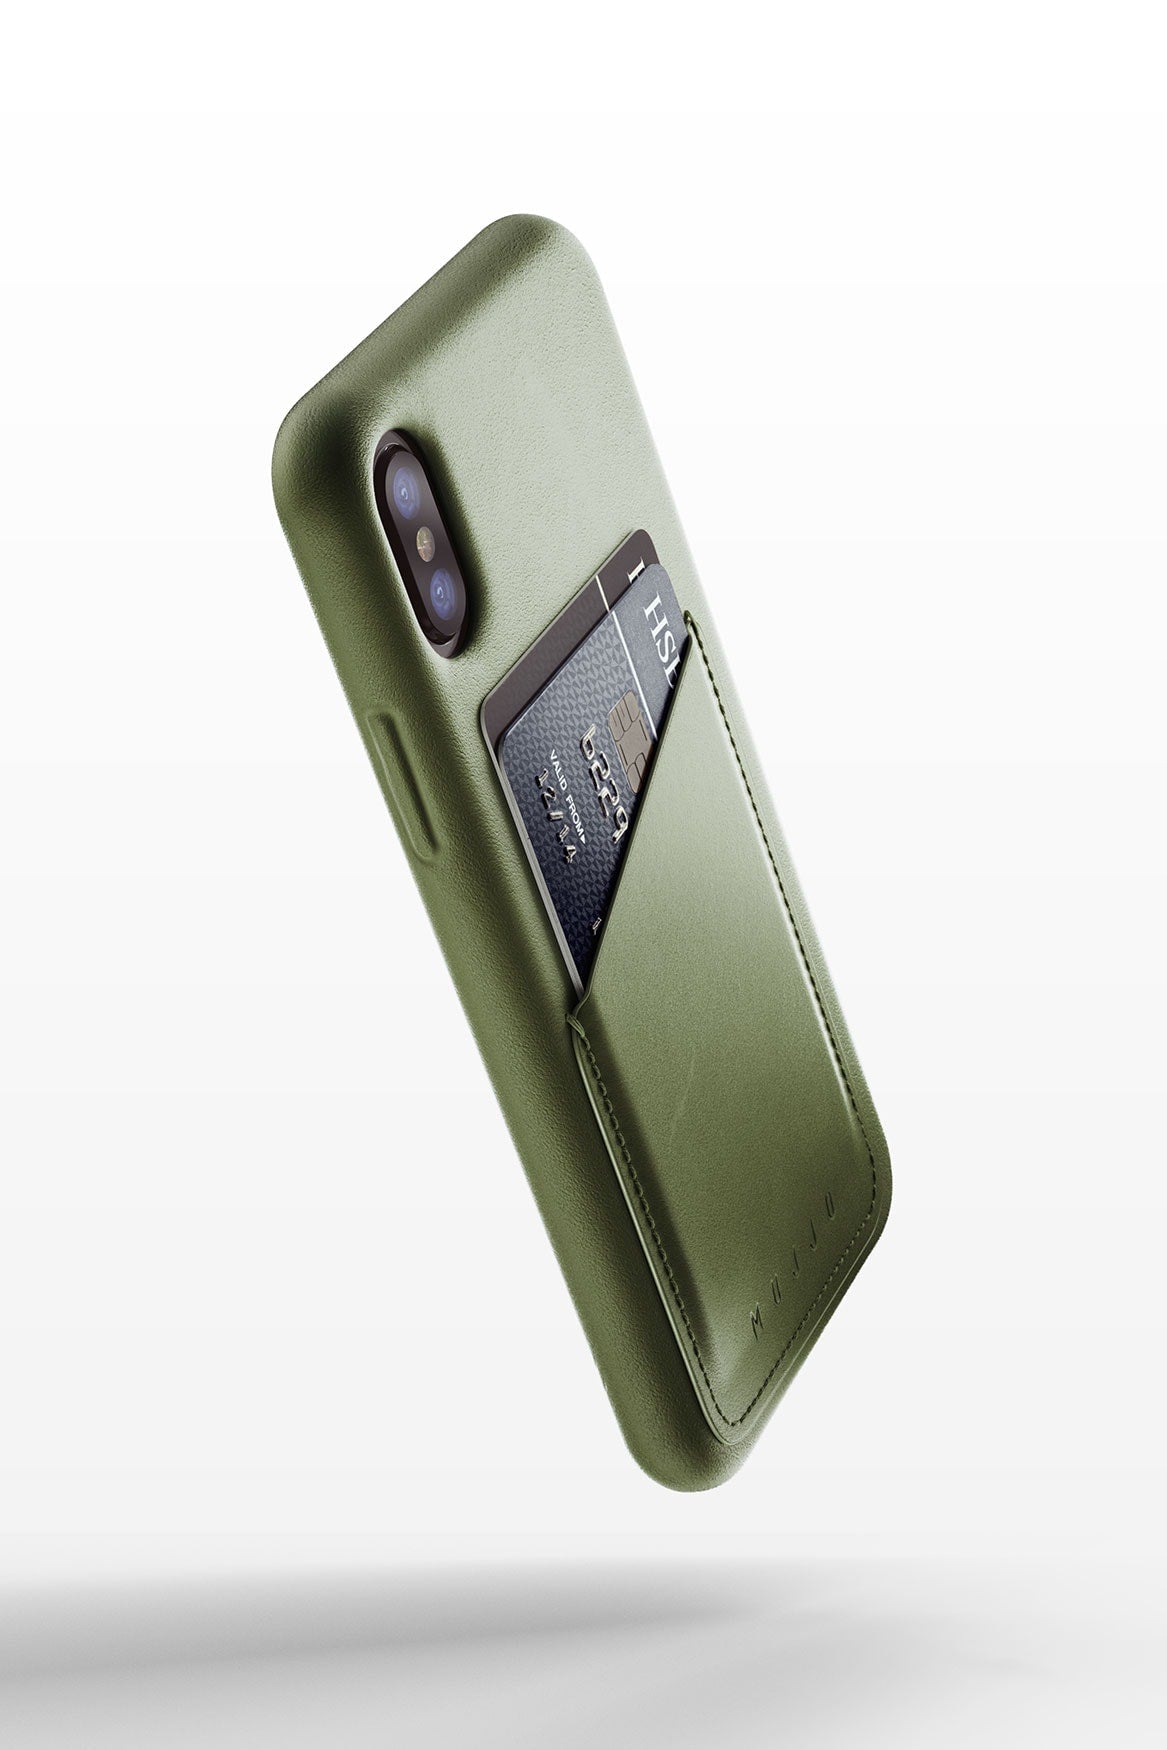 Full leather wallet case for iphone x Olive 02